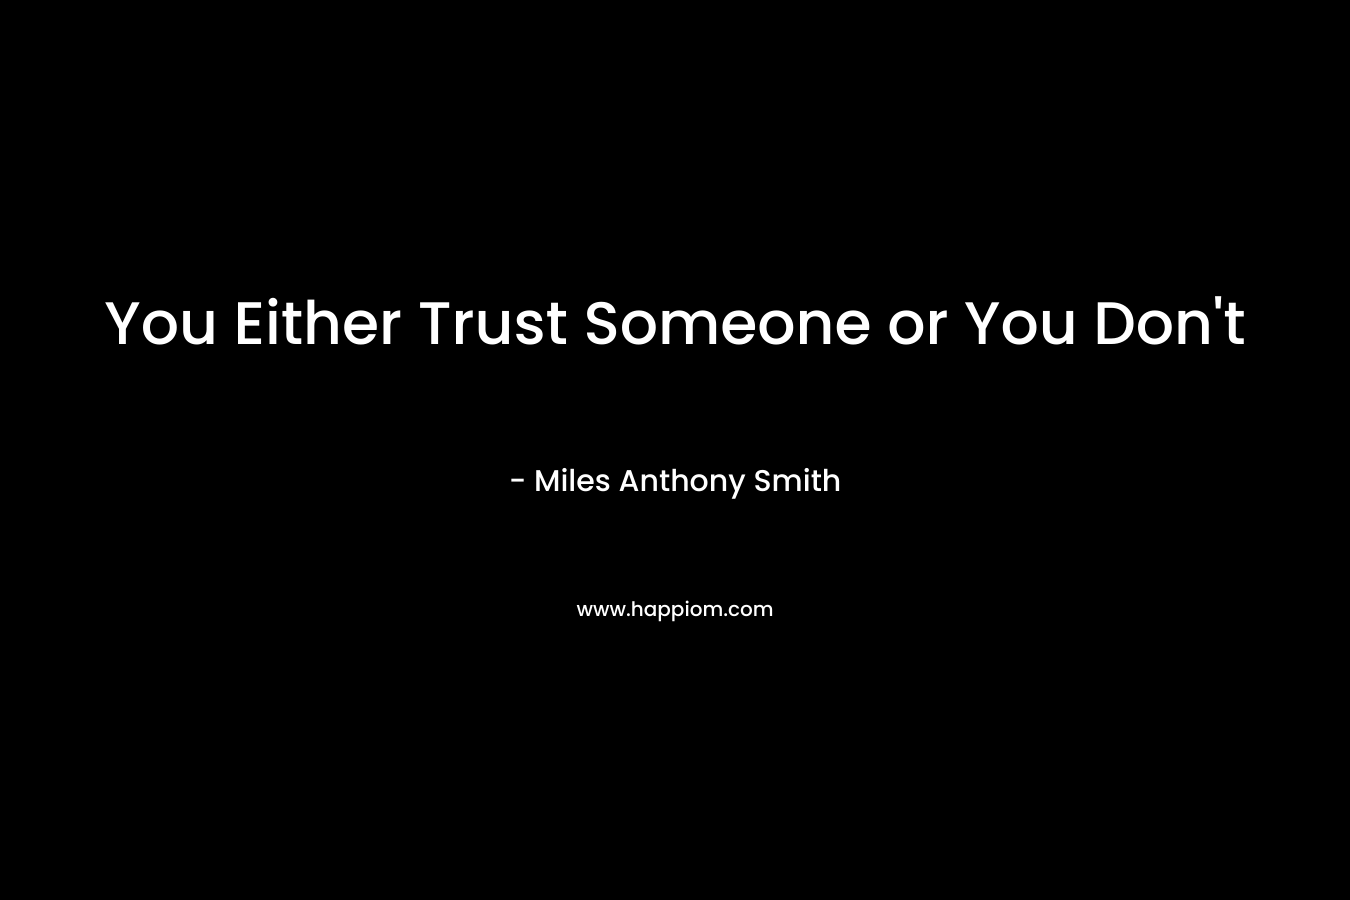 You Either Trust Someone or You Don't